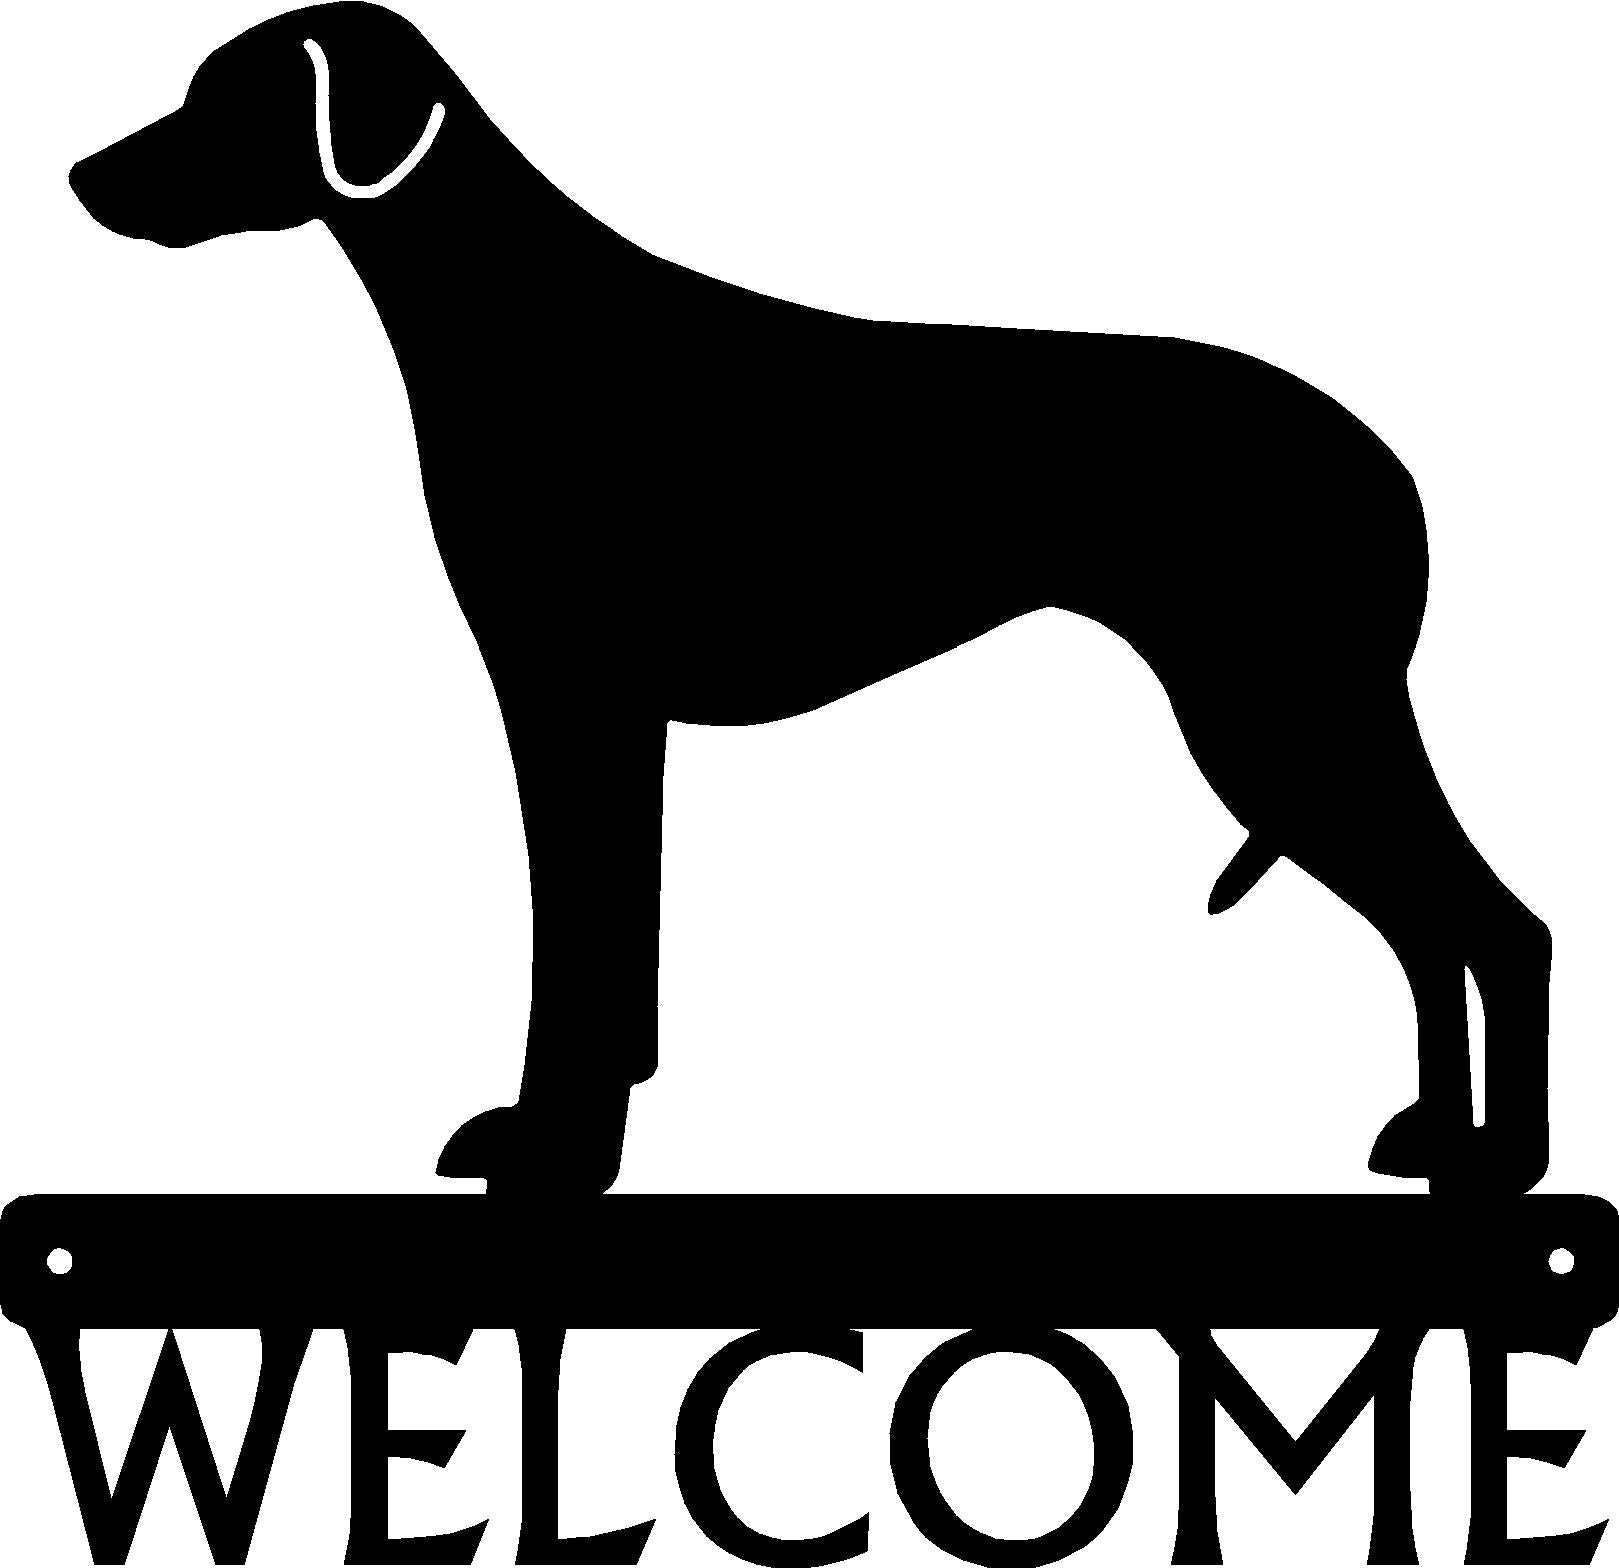 Rhodesian Ridgeback Dog Welcome Sign - The Metal Peddler Welcome Signs breed, Breed R, Dog, Name plaque, name sign, Personalized Gifts, Personalized Signs, personalizetext, porch, Rhodesian Ridgeback, welcome sign